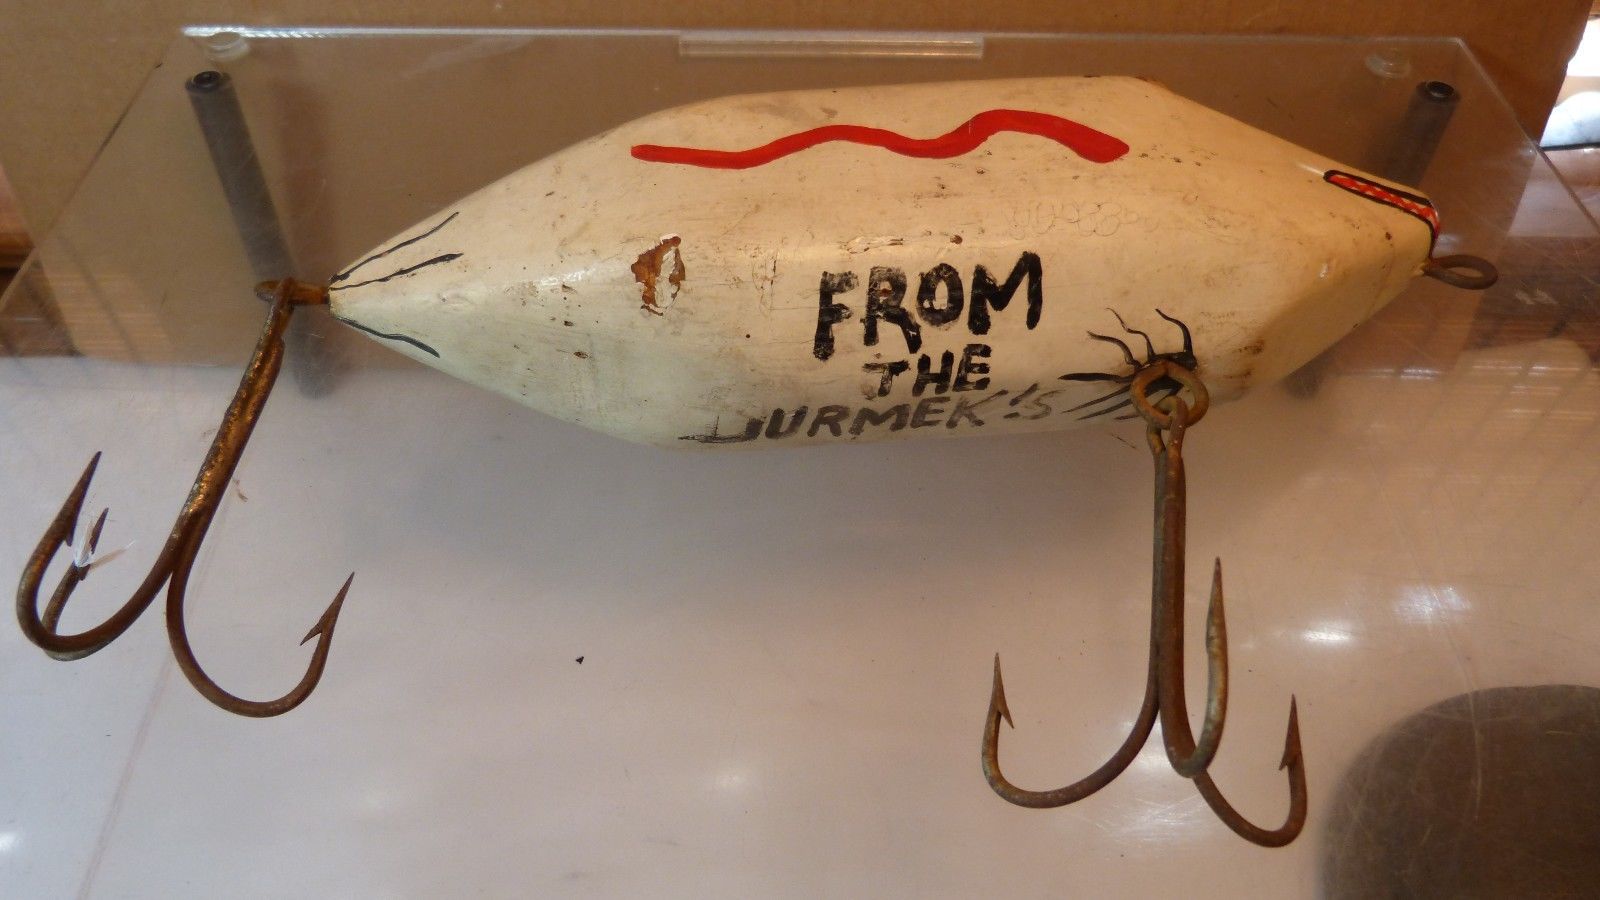 Chance's Folk Art Fishing Lure Research Blog: Chance's Weekly Likes